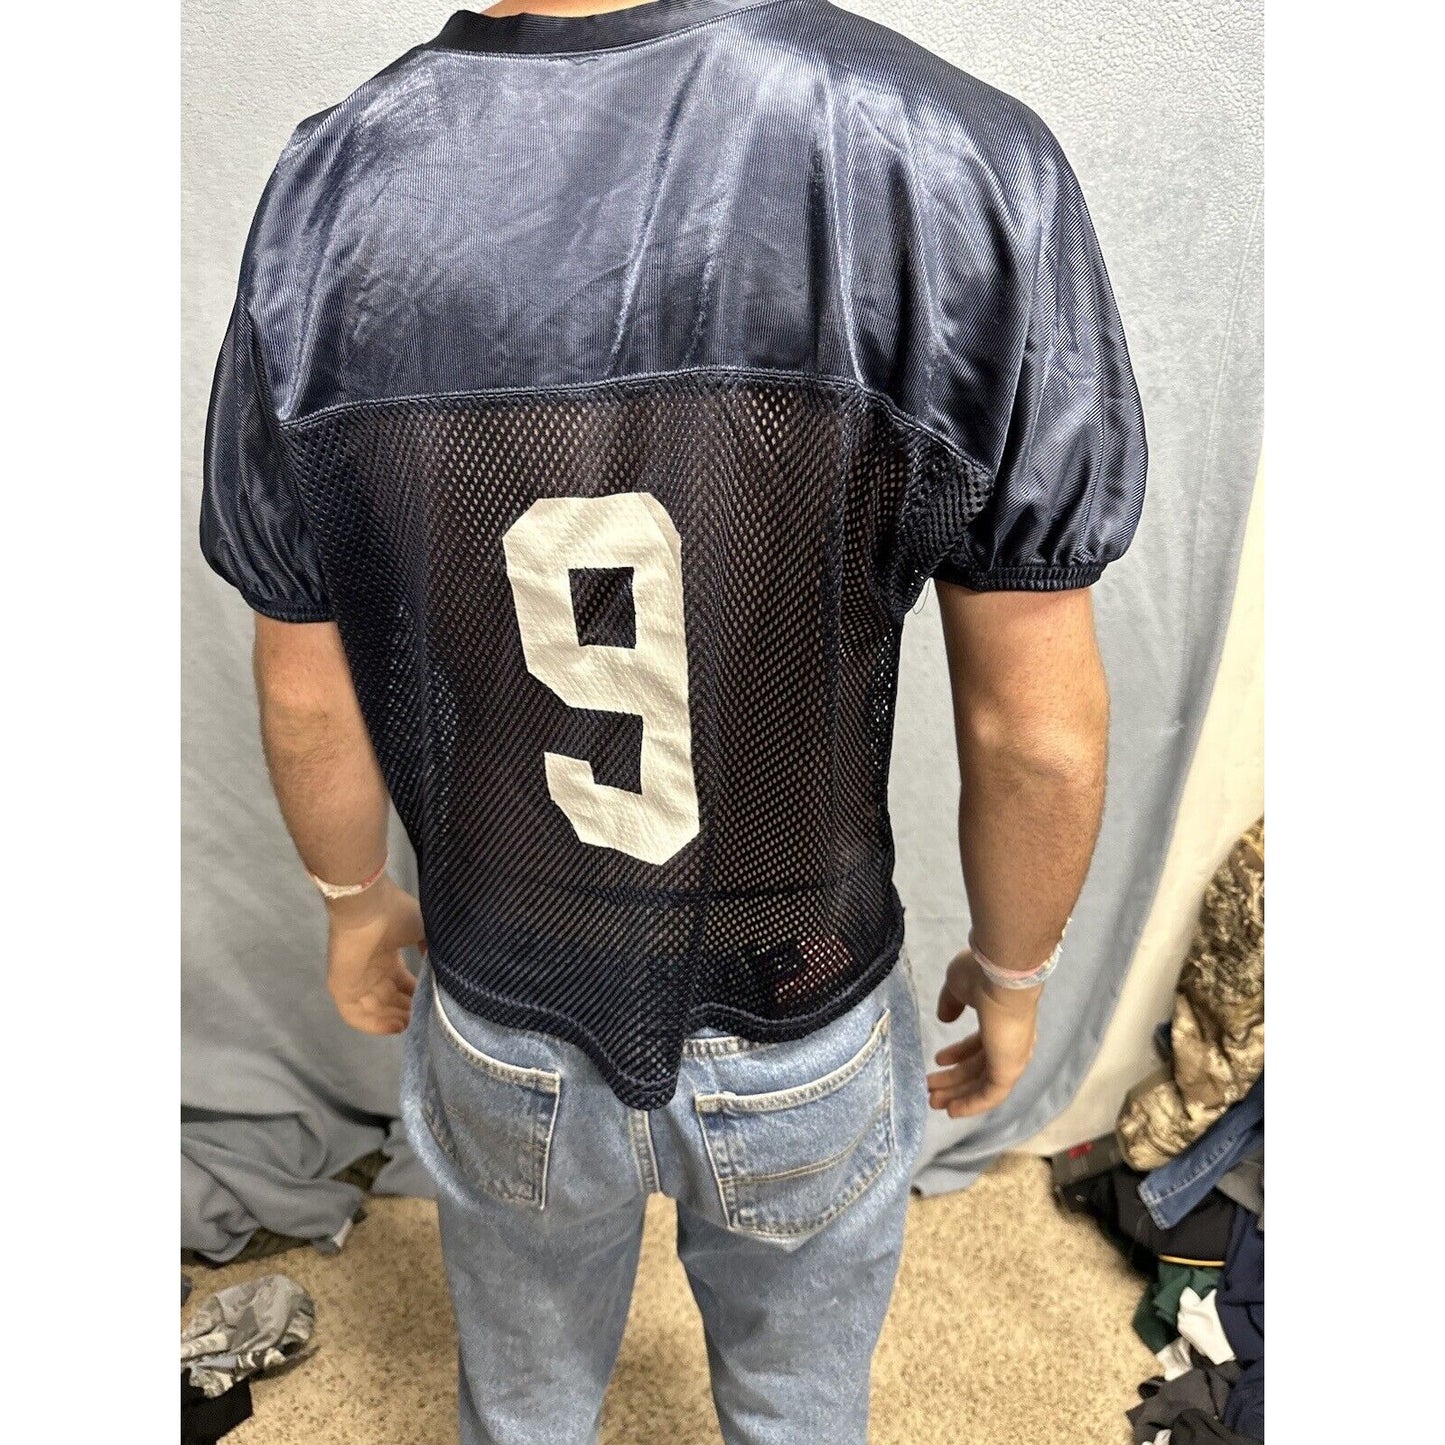 Youth Large/XL Alleson Athletics Navy Blue Football Jersey